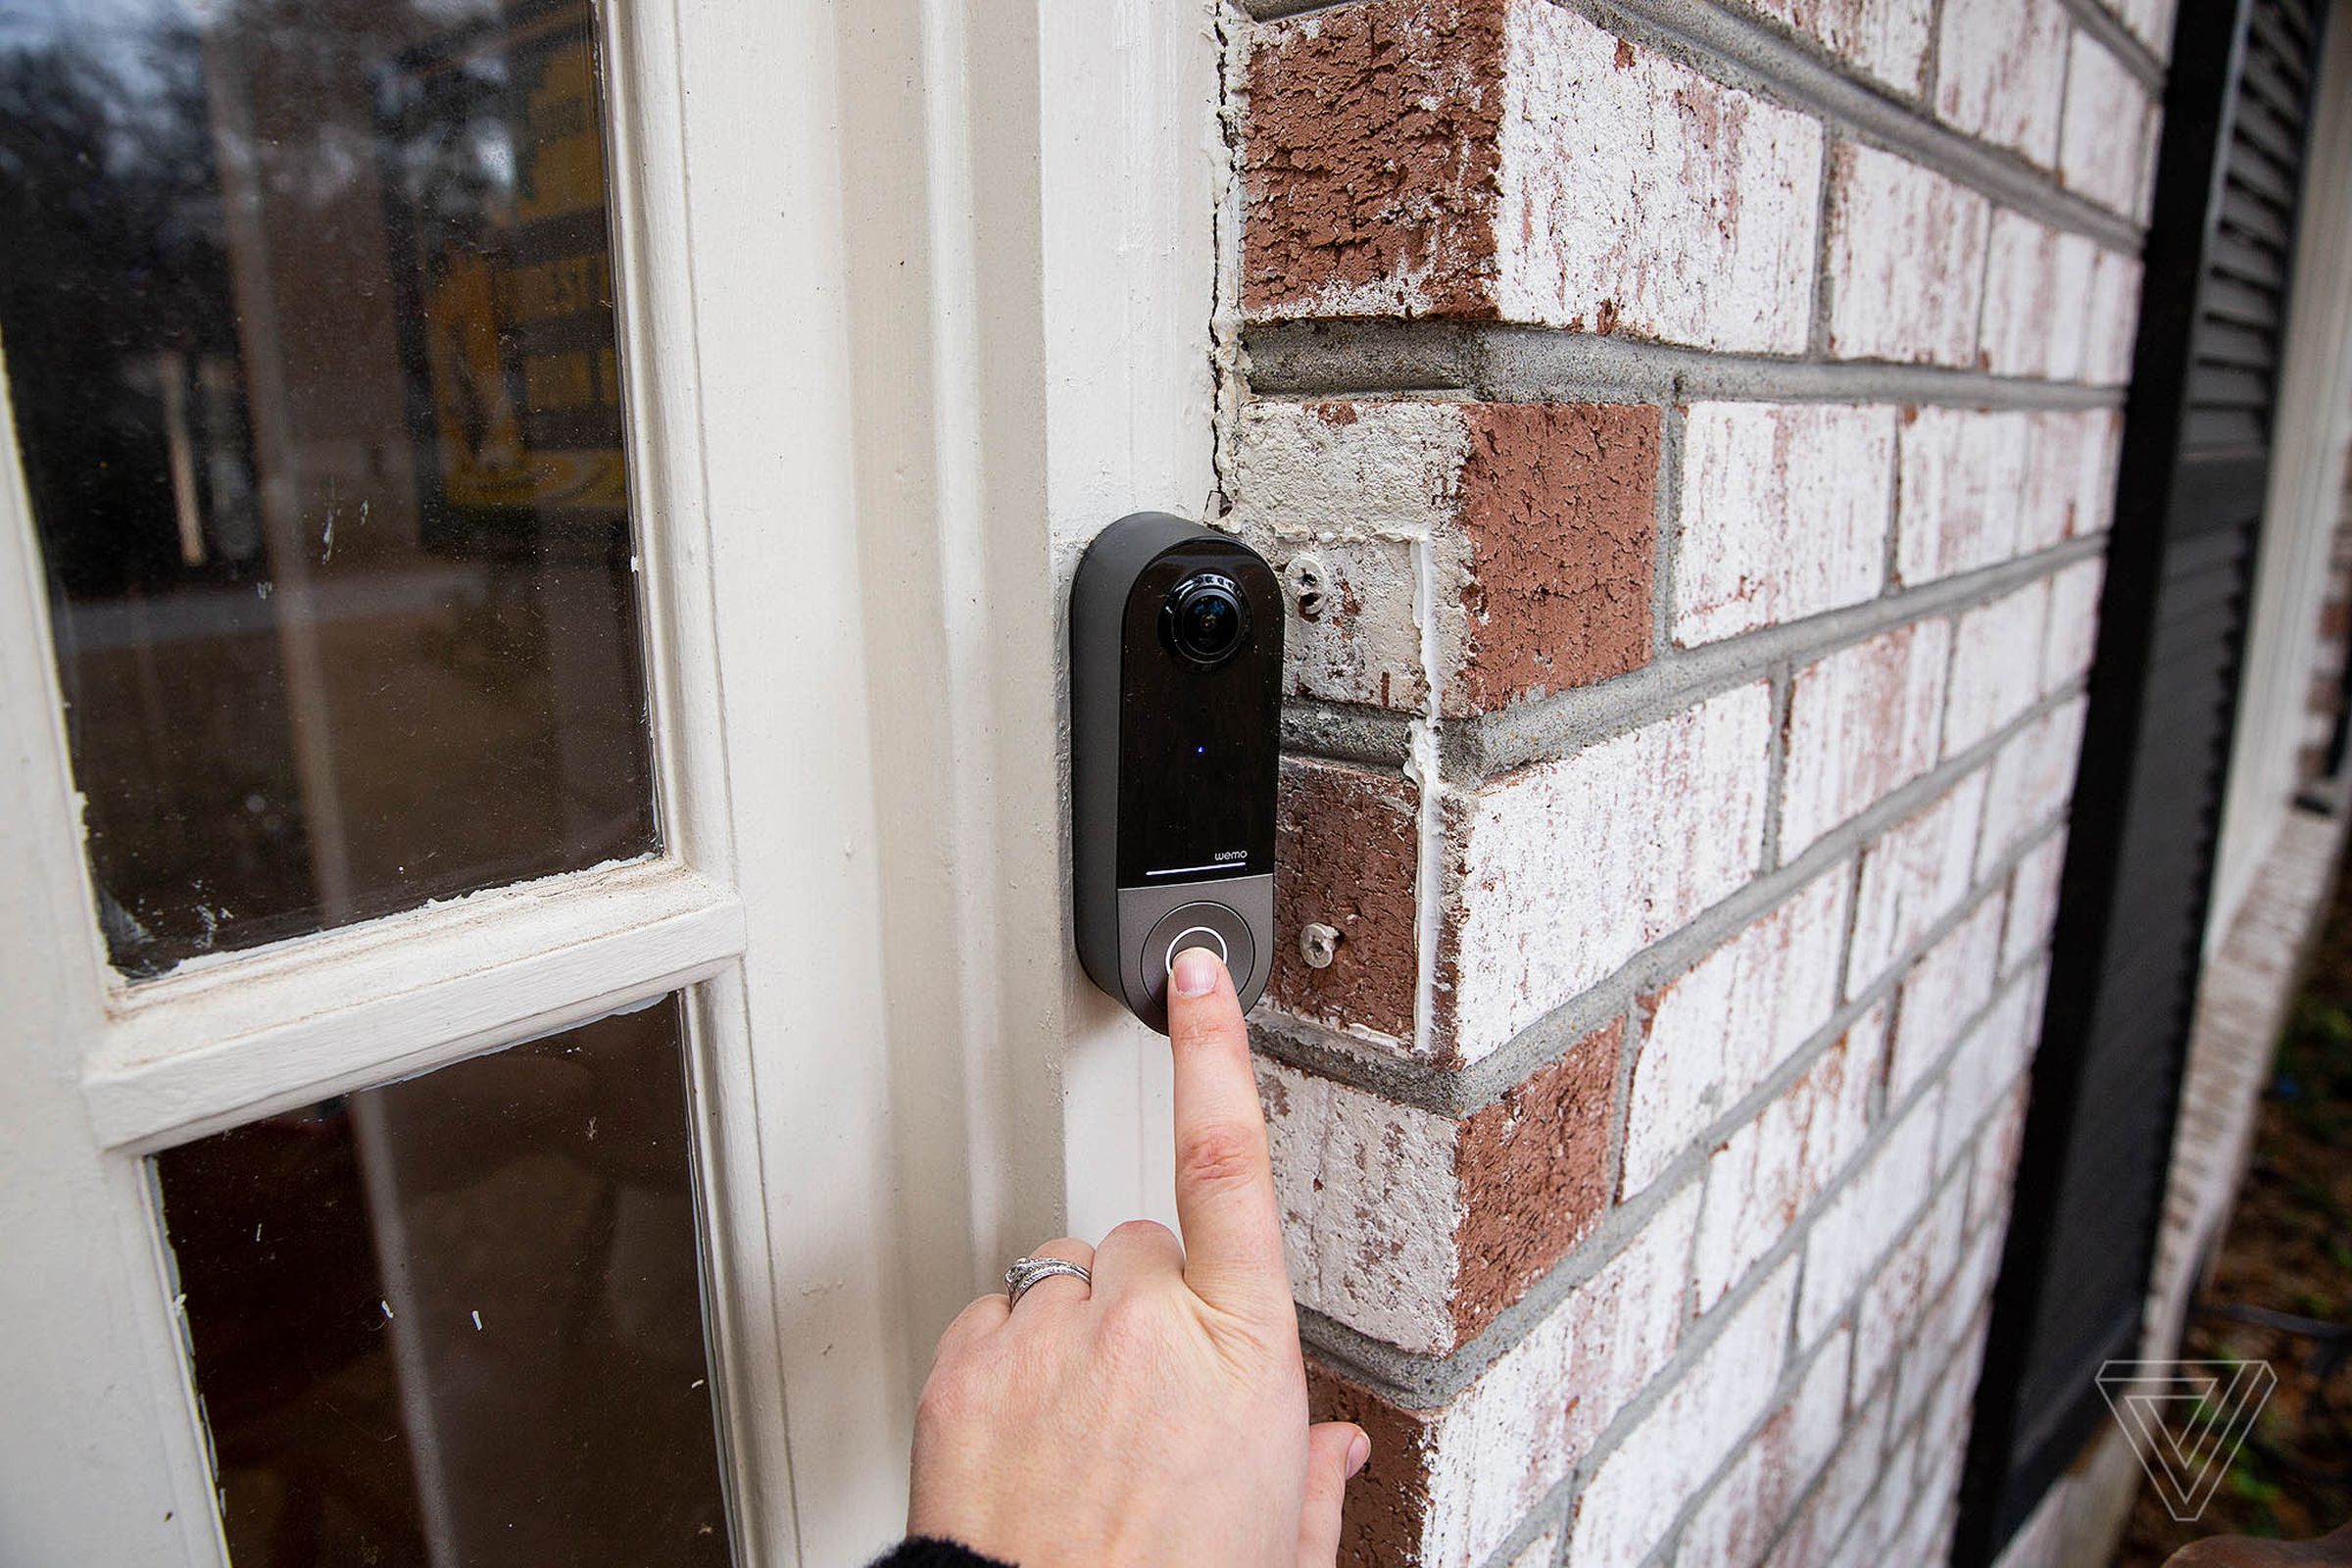 The Wemo doorbell does a good job of making it clear which button to push to ring the doorbell.